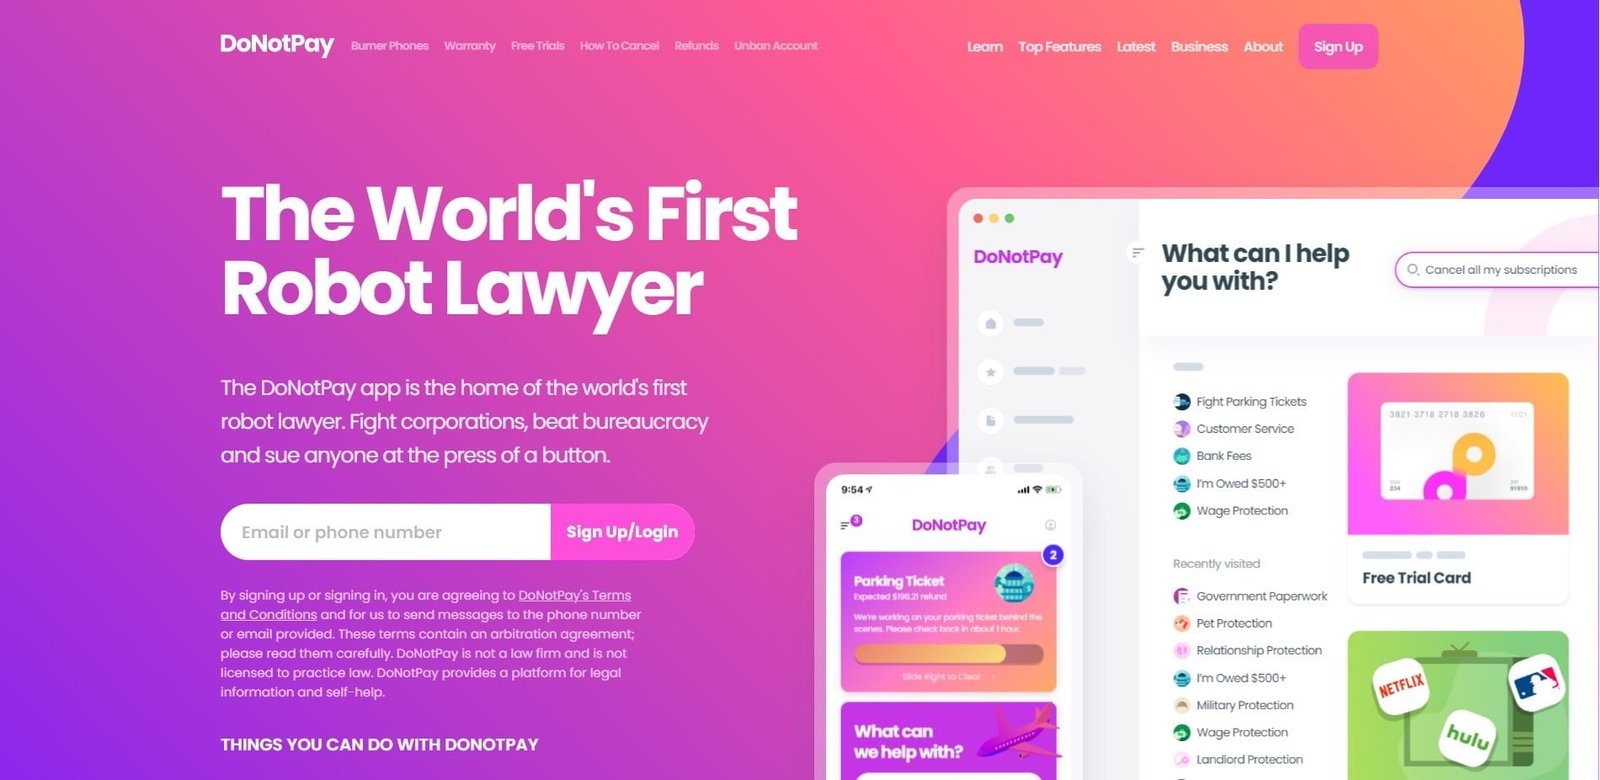 DoNotPay is an innovative Law AI platform that offers users access to the world's first robot lawyer.